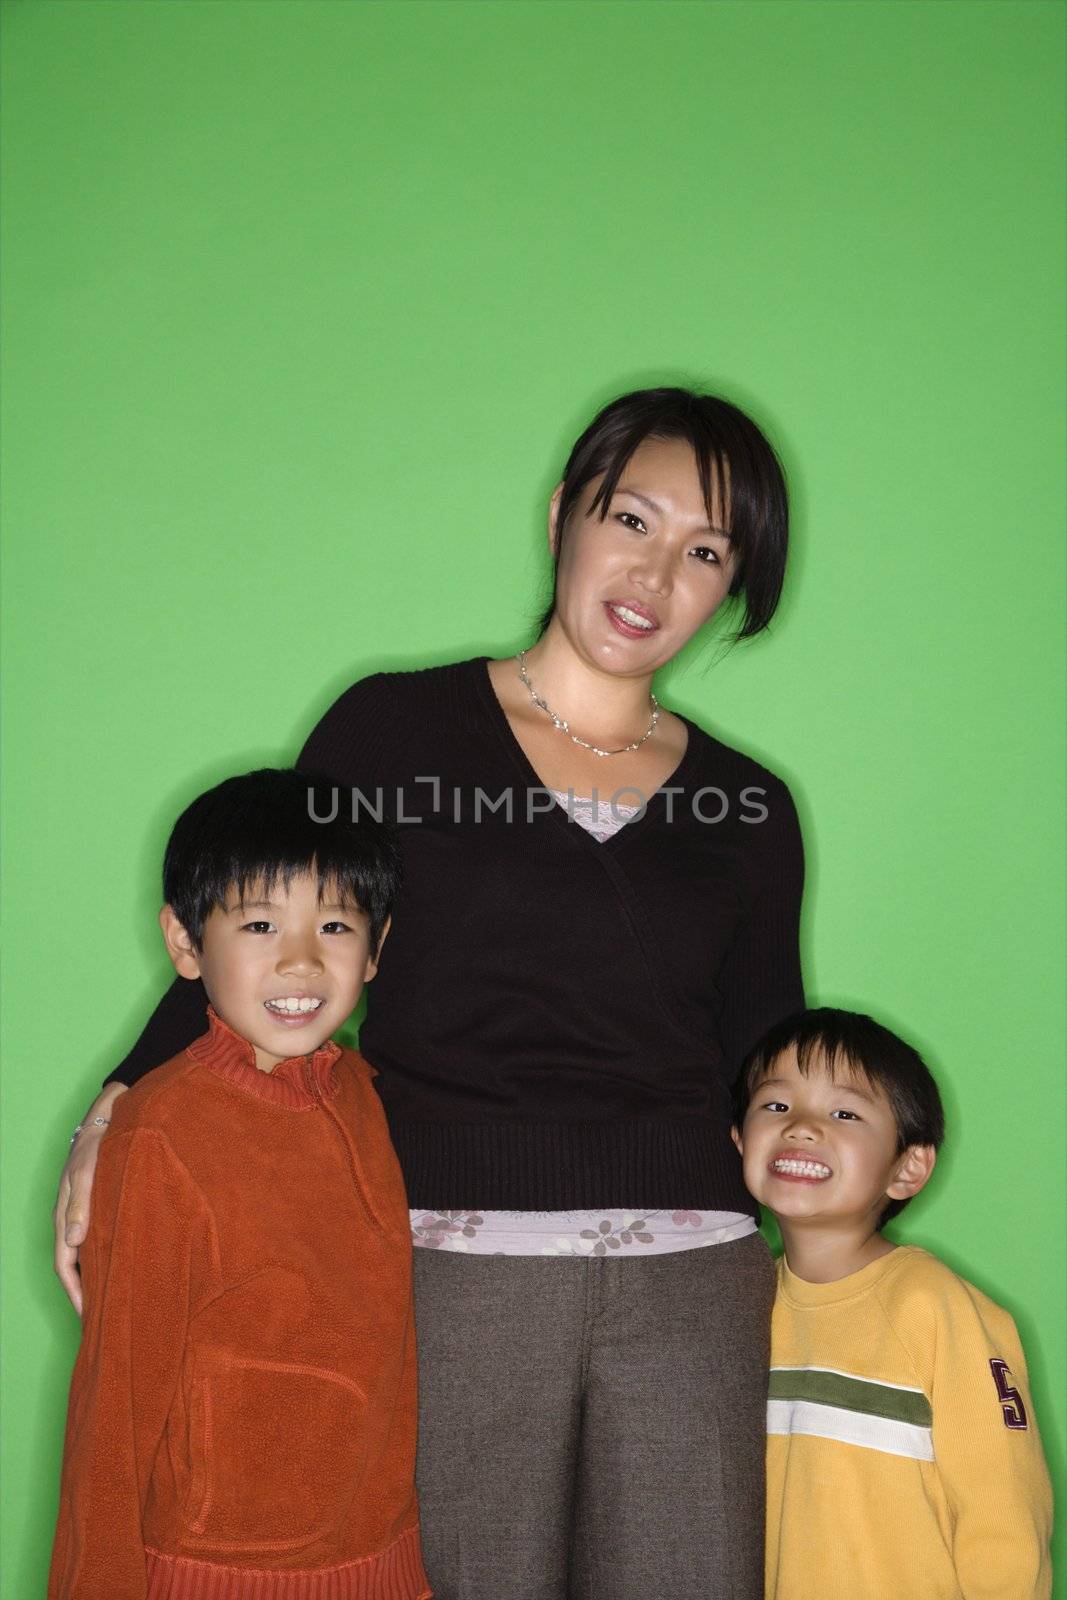 Portrait of Asian mother with two young boys smiling.